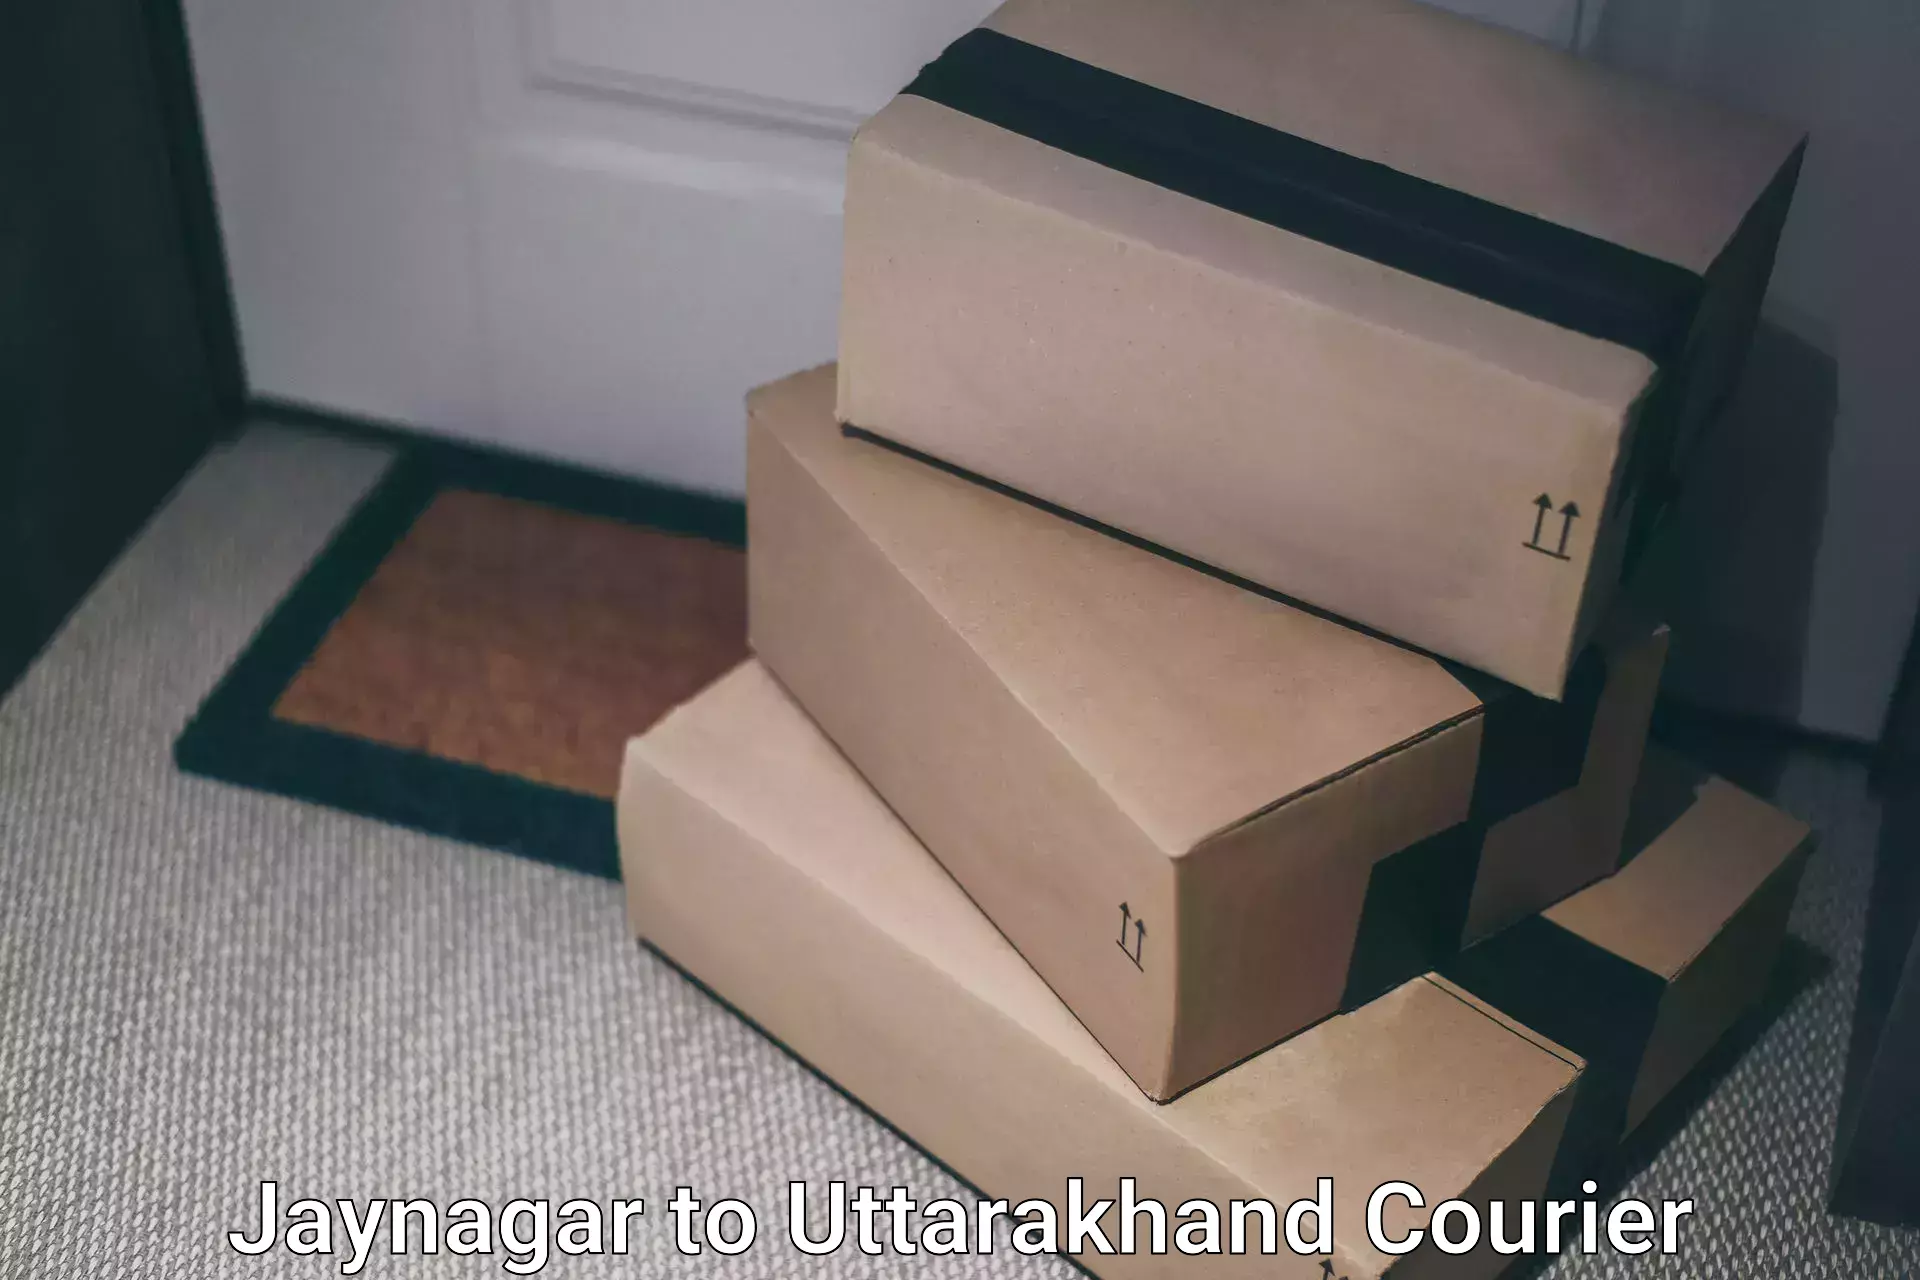 High-quality delivery services Jaynagar to Lohaghat